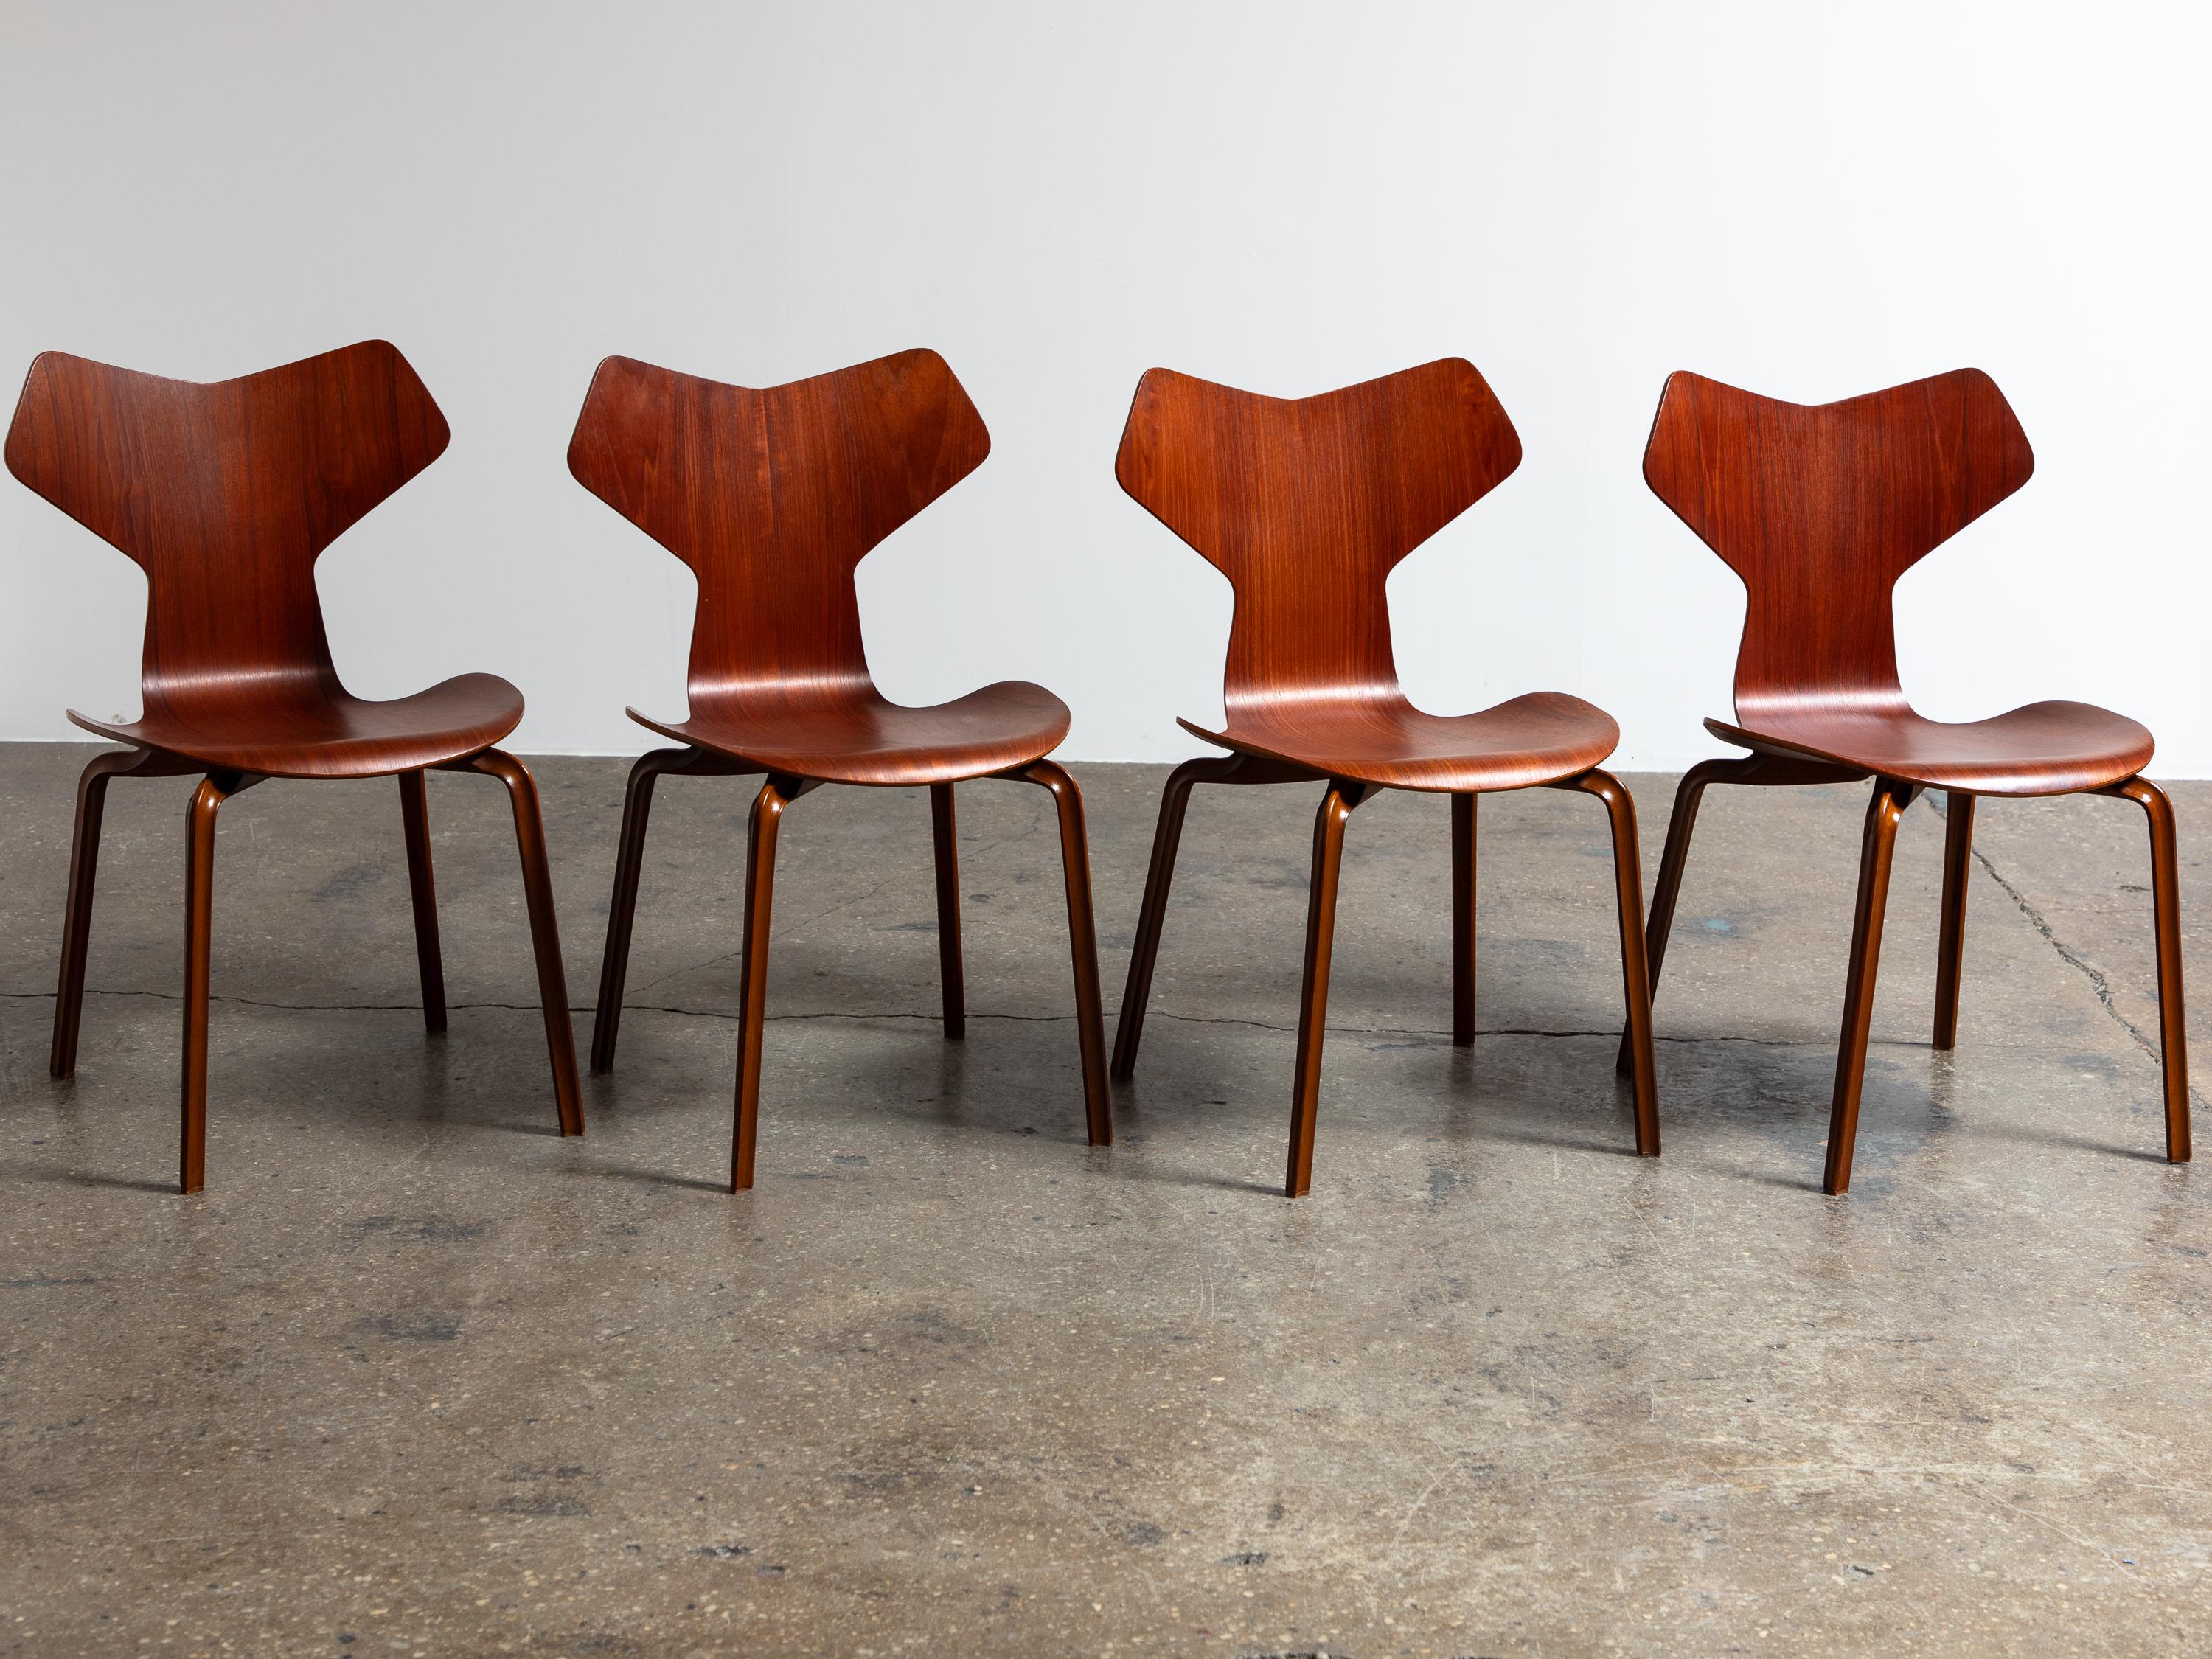 Arne Jacobsen for Fritz Hansen Grand Prix Chairs - Set of 4 In Good Condition For Sale In Brooklyn, NY